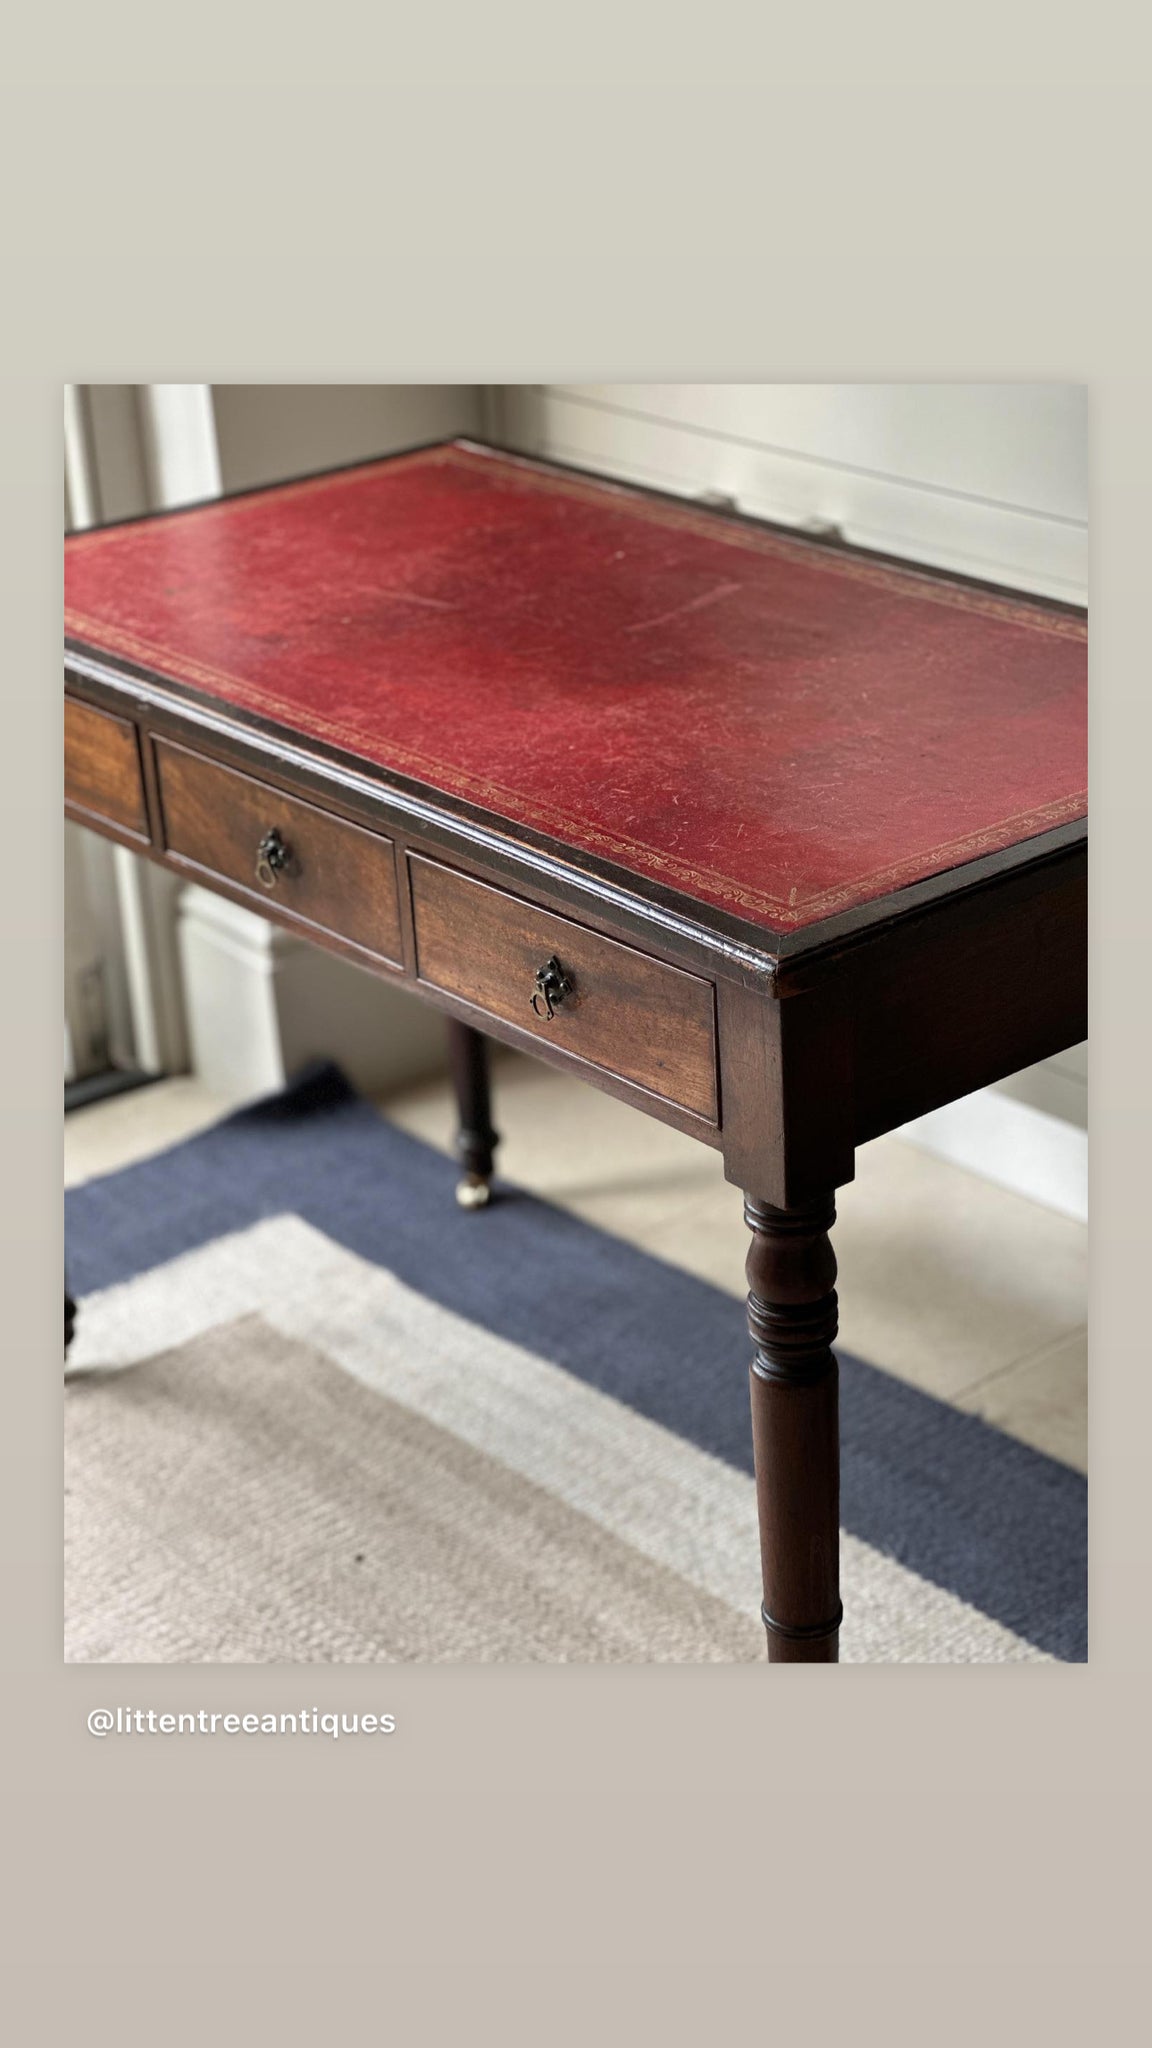 Mahogany Desk with Red Leather Top